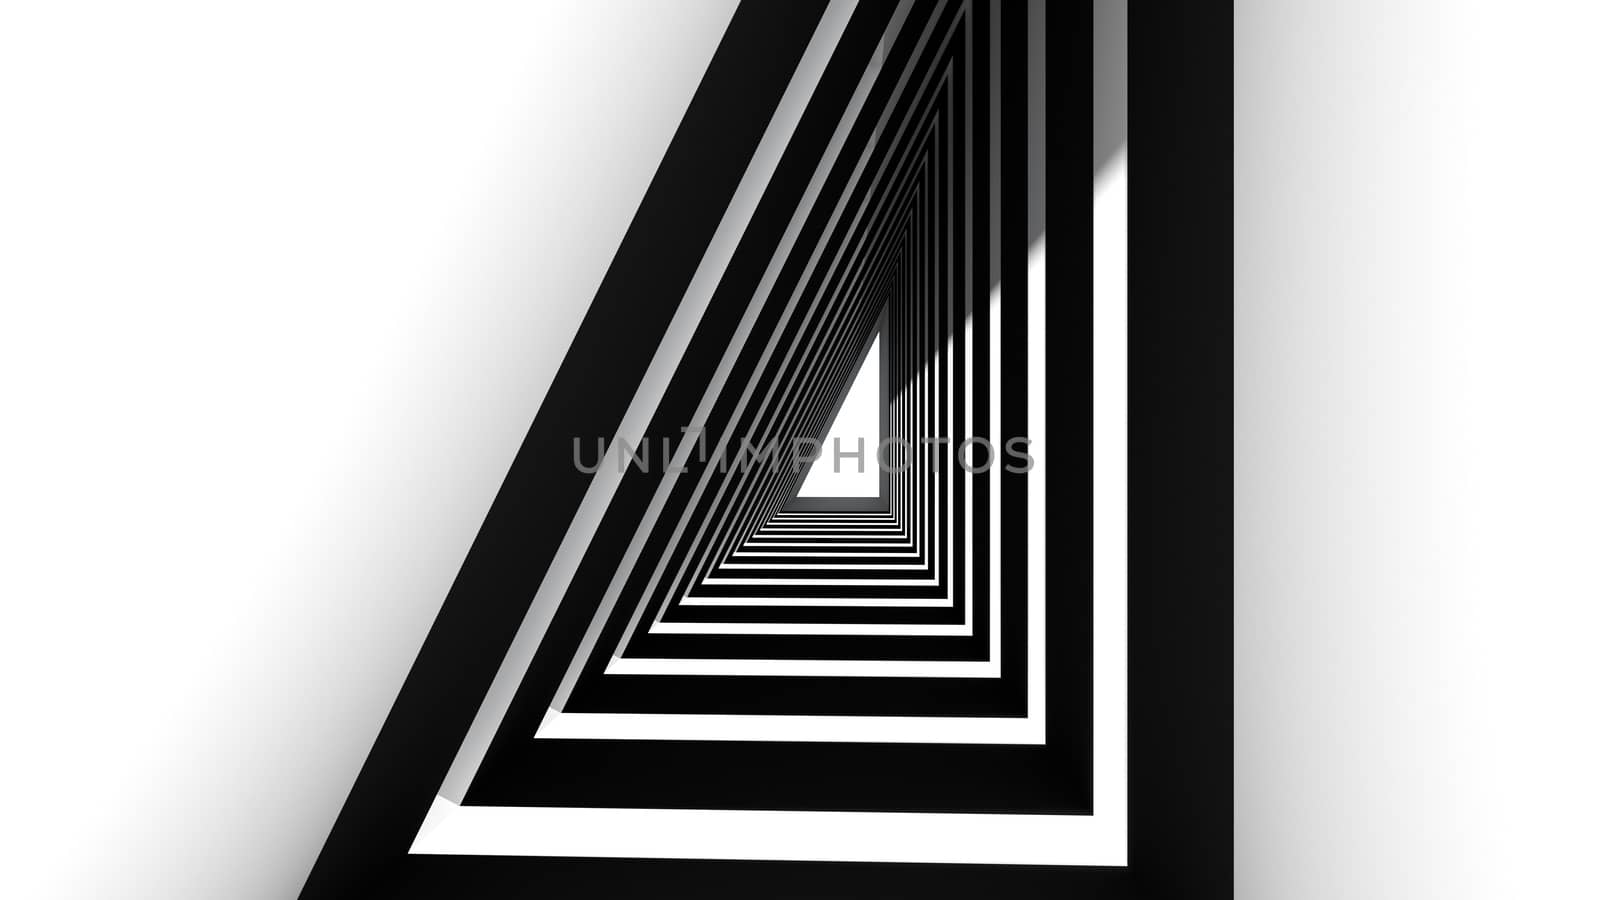 3d render of abstract triangle shape in tunnel background by mhaostudio